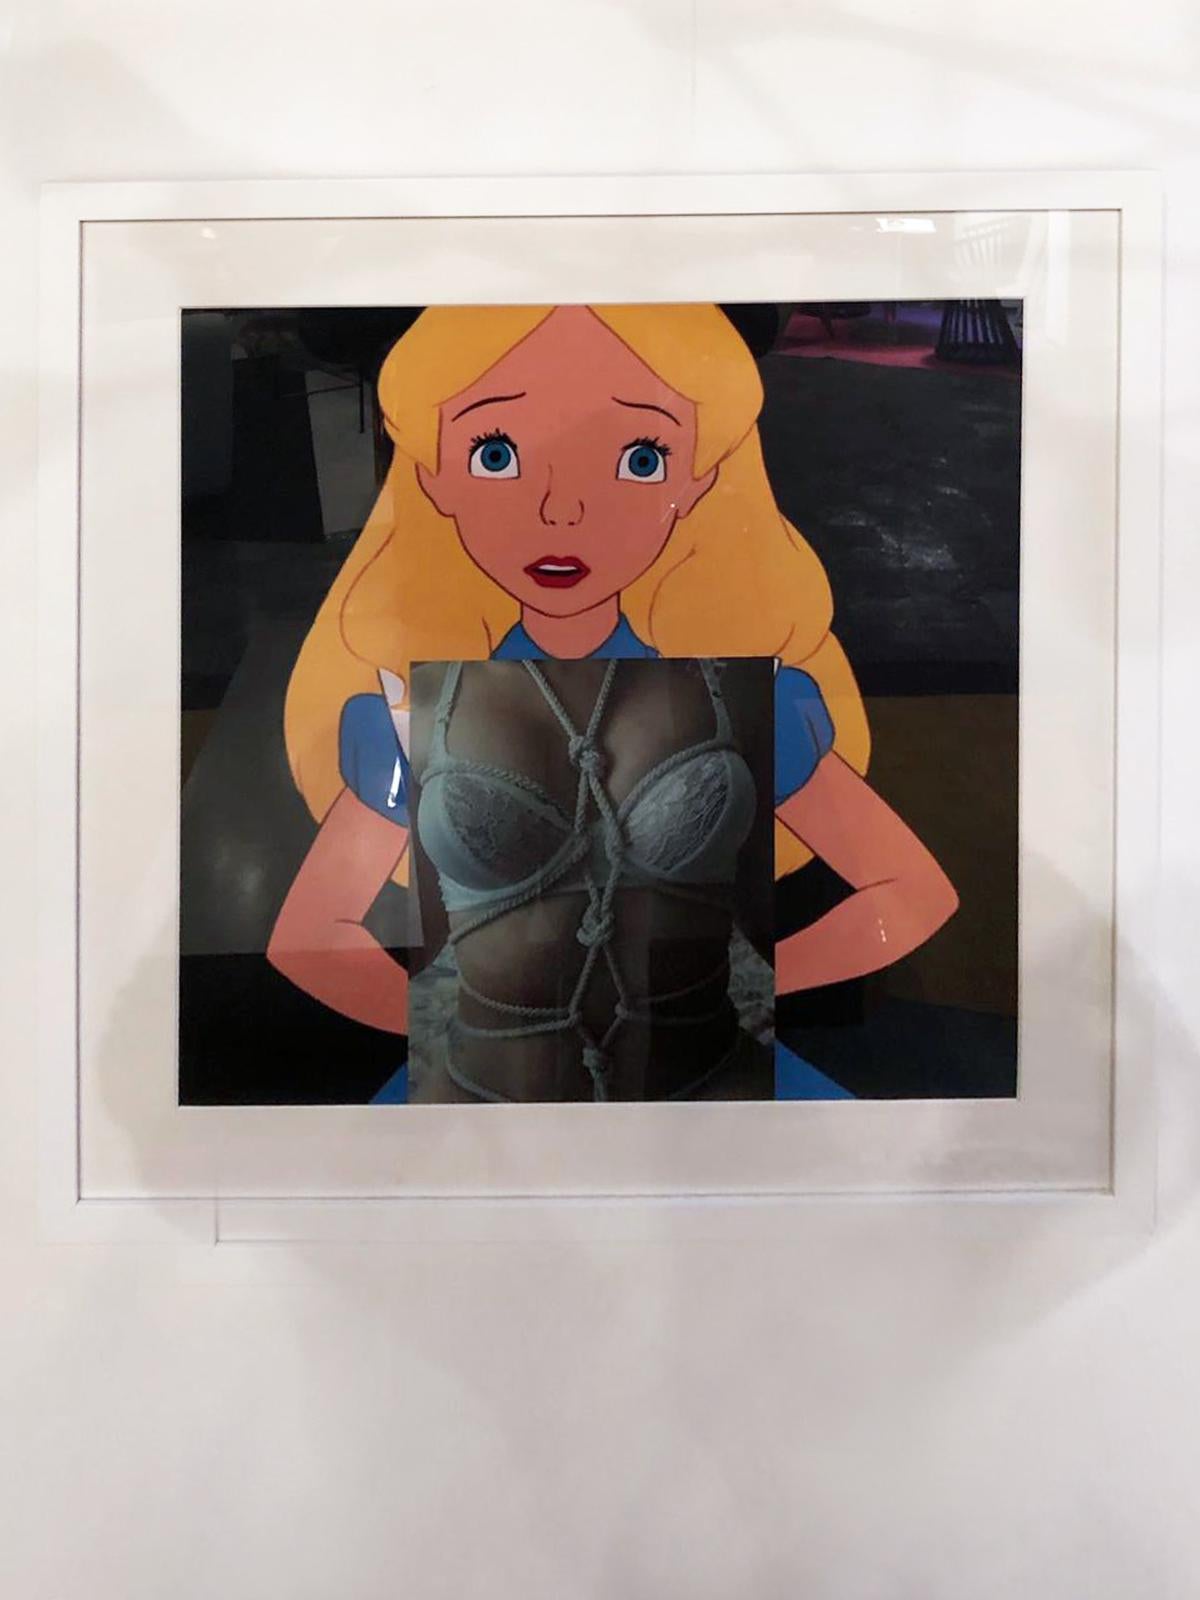 Disney's Alice in Wonderland + Bondage digital collage print by Spanish artist Naro Pinosa, made famous in social media. Unique signed-by-artist piece. Authenticity certificated.
Print on photography papper. Glass and white lacquered wooden frame.